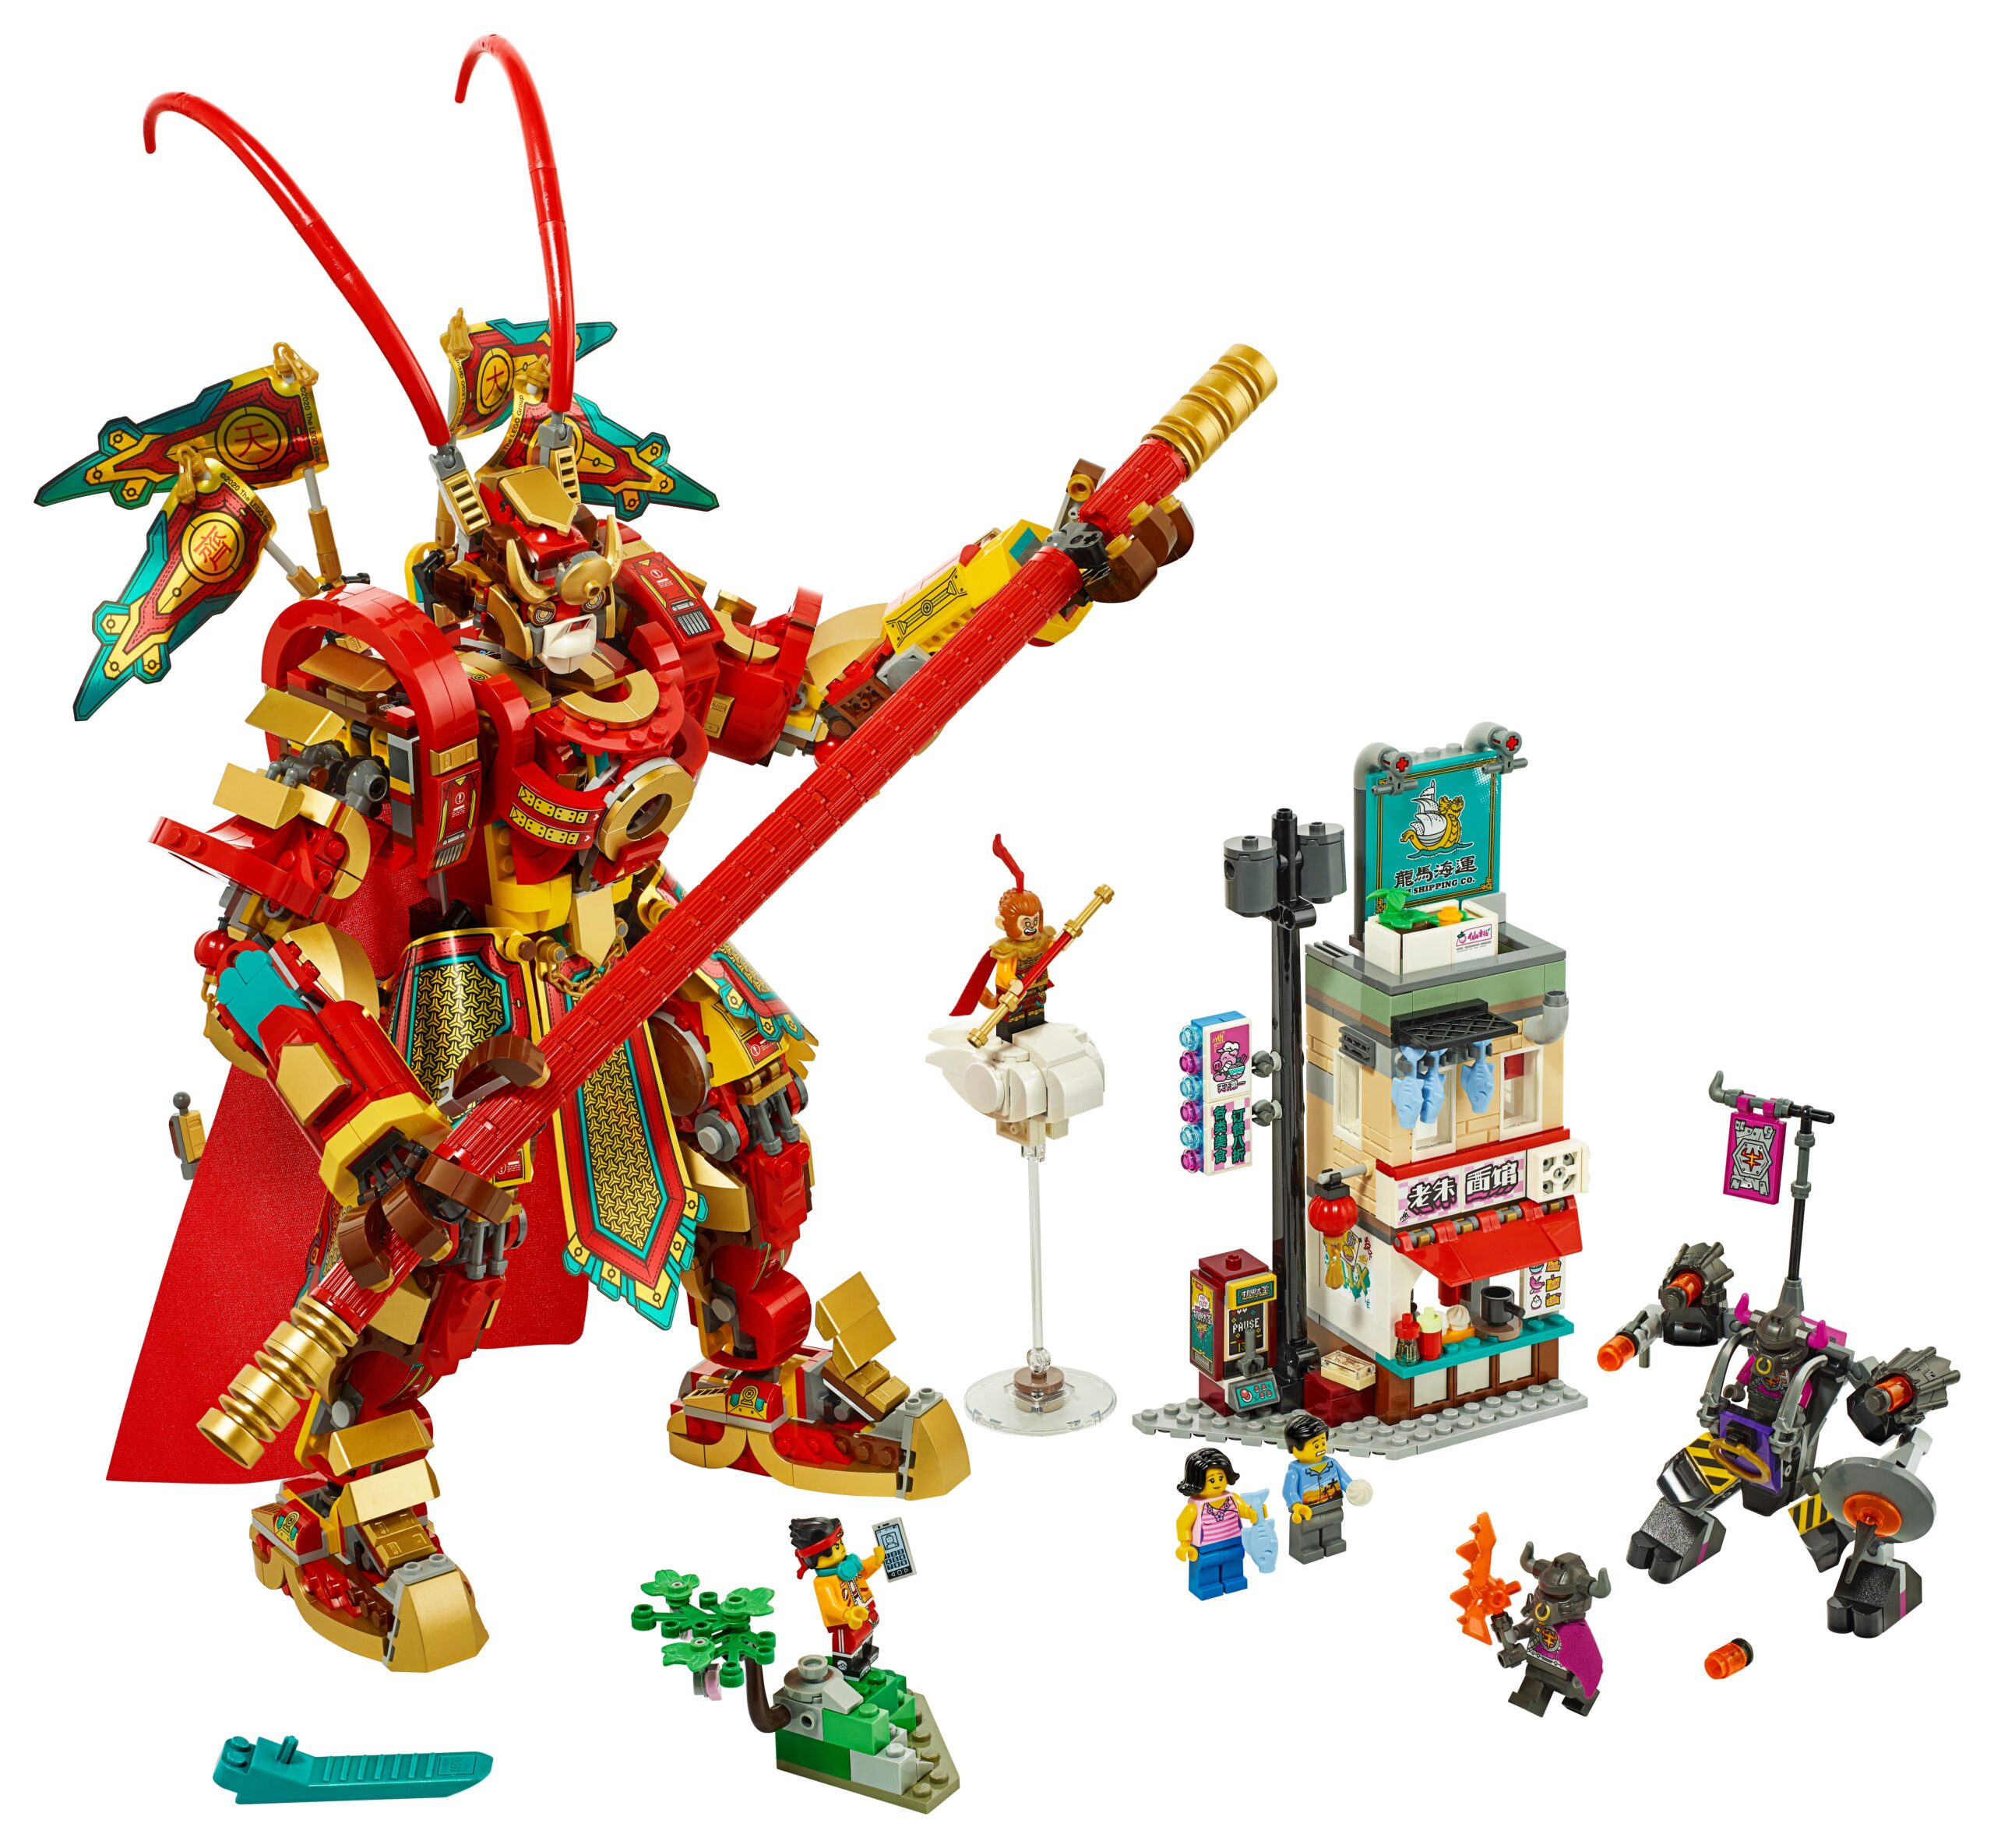 LEGO Monkie Kid got bigger with new 2023 sets